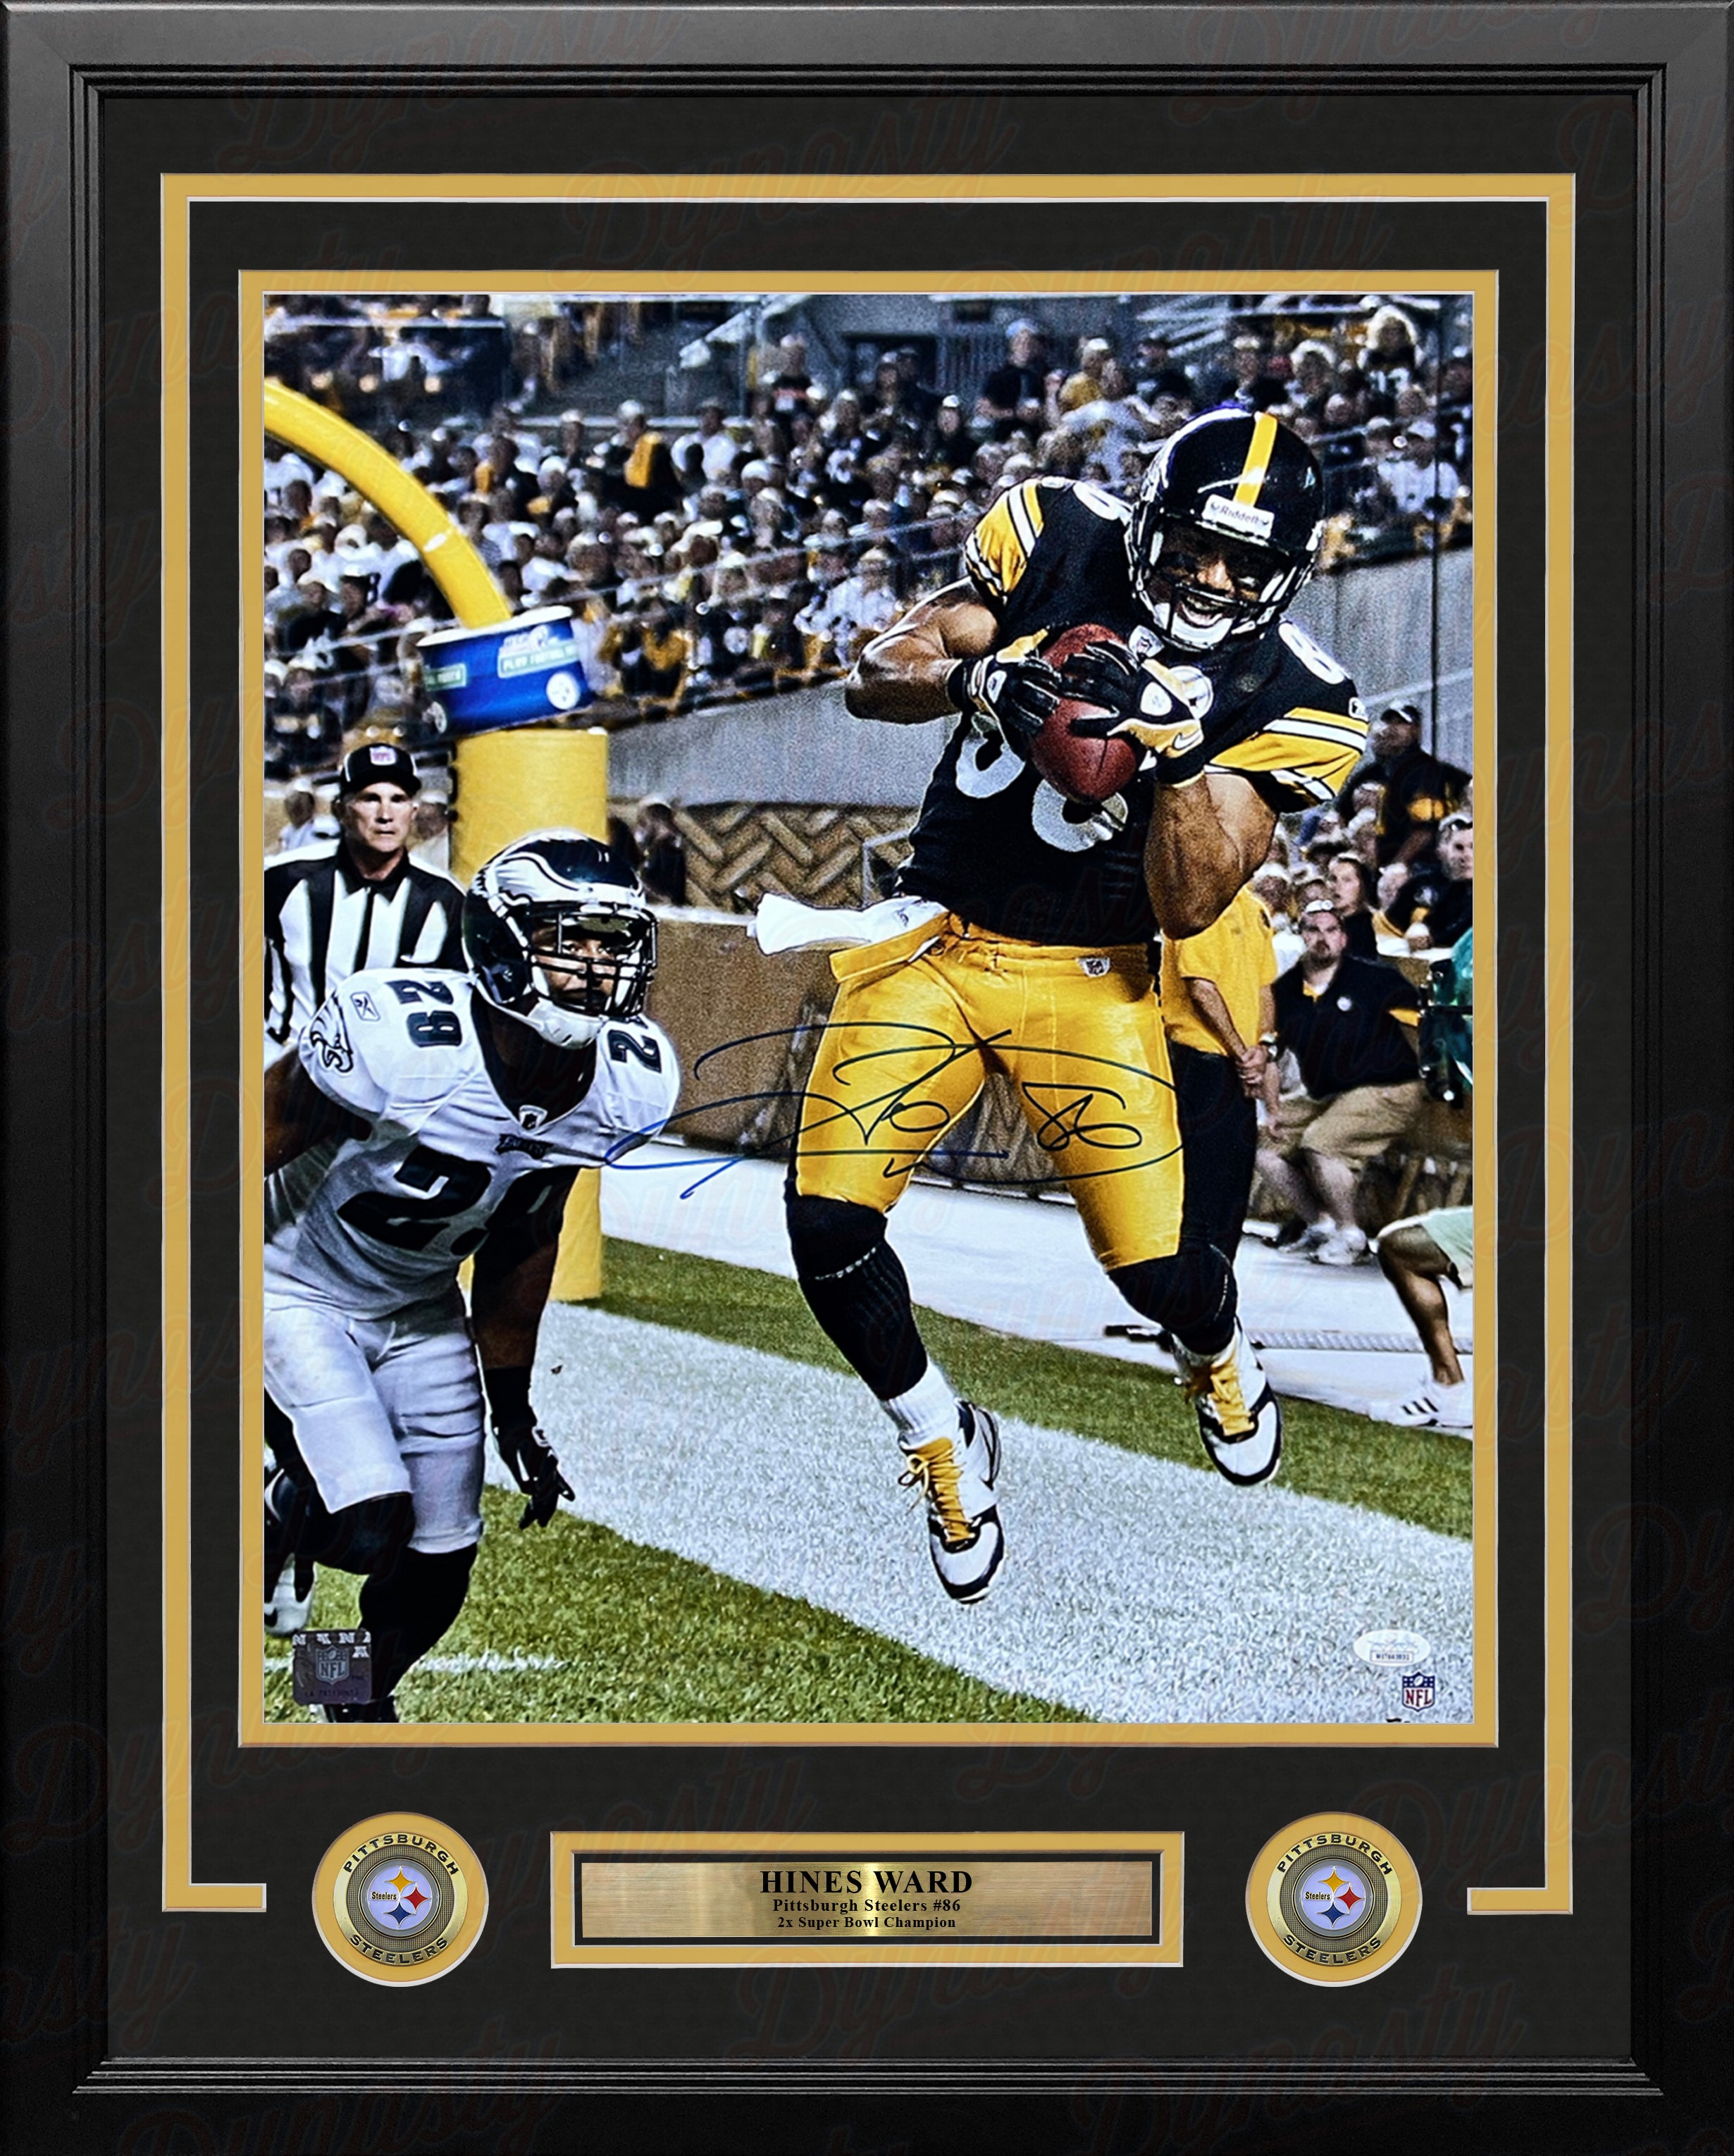 Hines Ward Leaping Touchdown Pittsburgh Steelers Autographed 16' x 20'  Framed Football Photo - Dynasty Sports & Framing